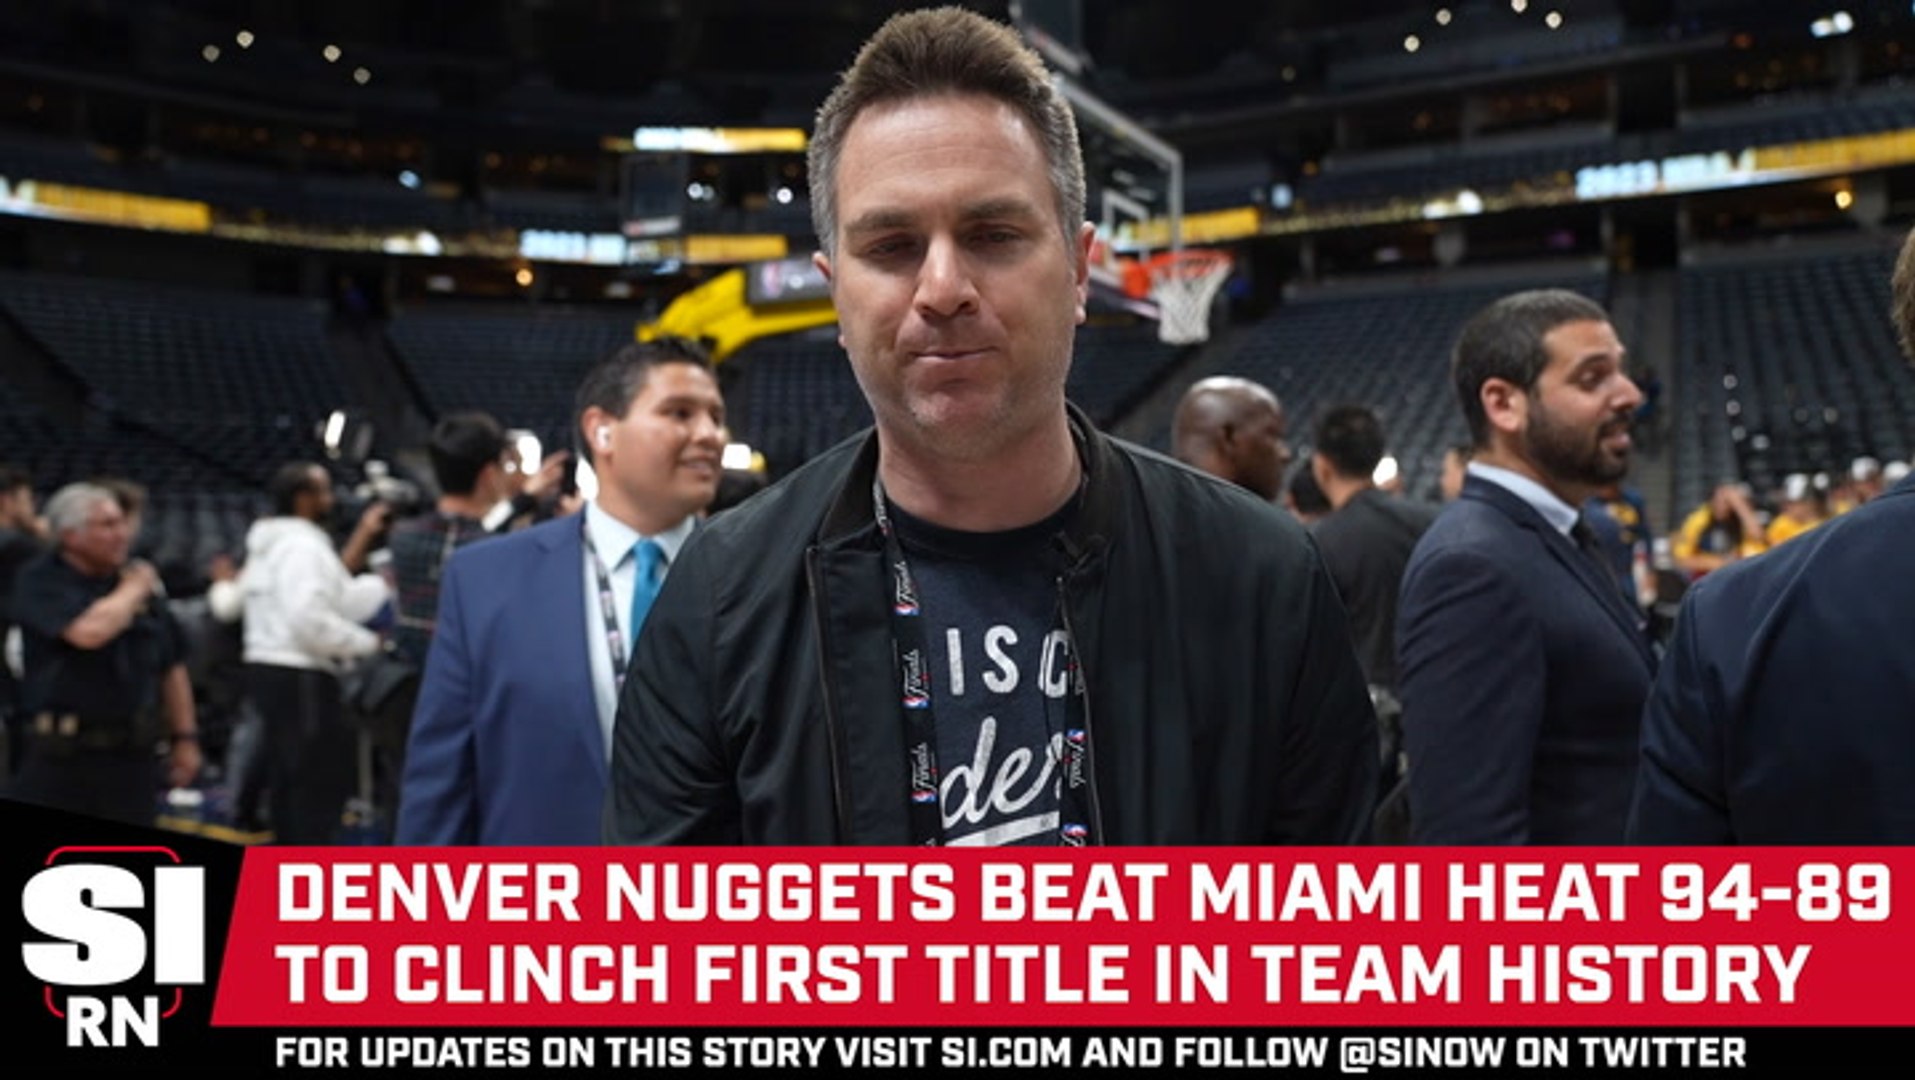 Nuggets win their first playoff series since 1994